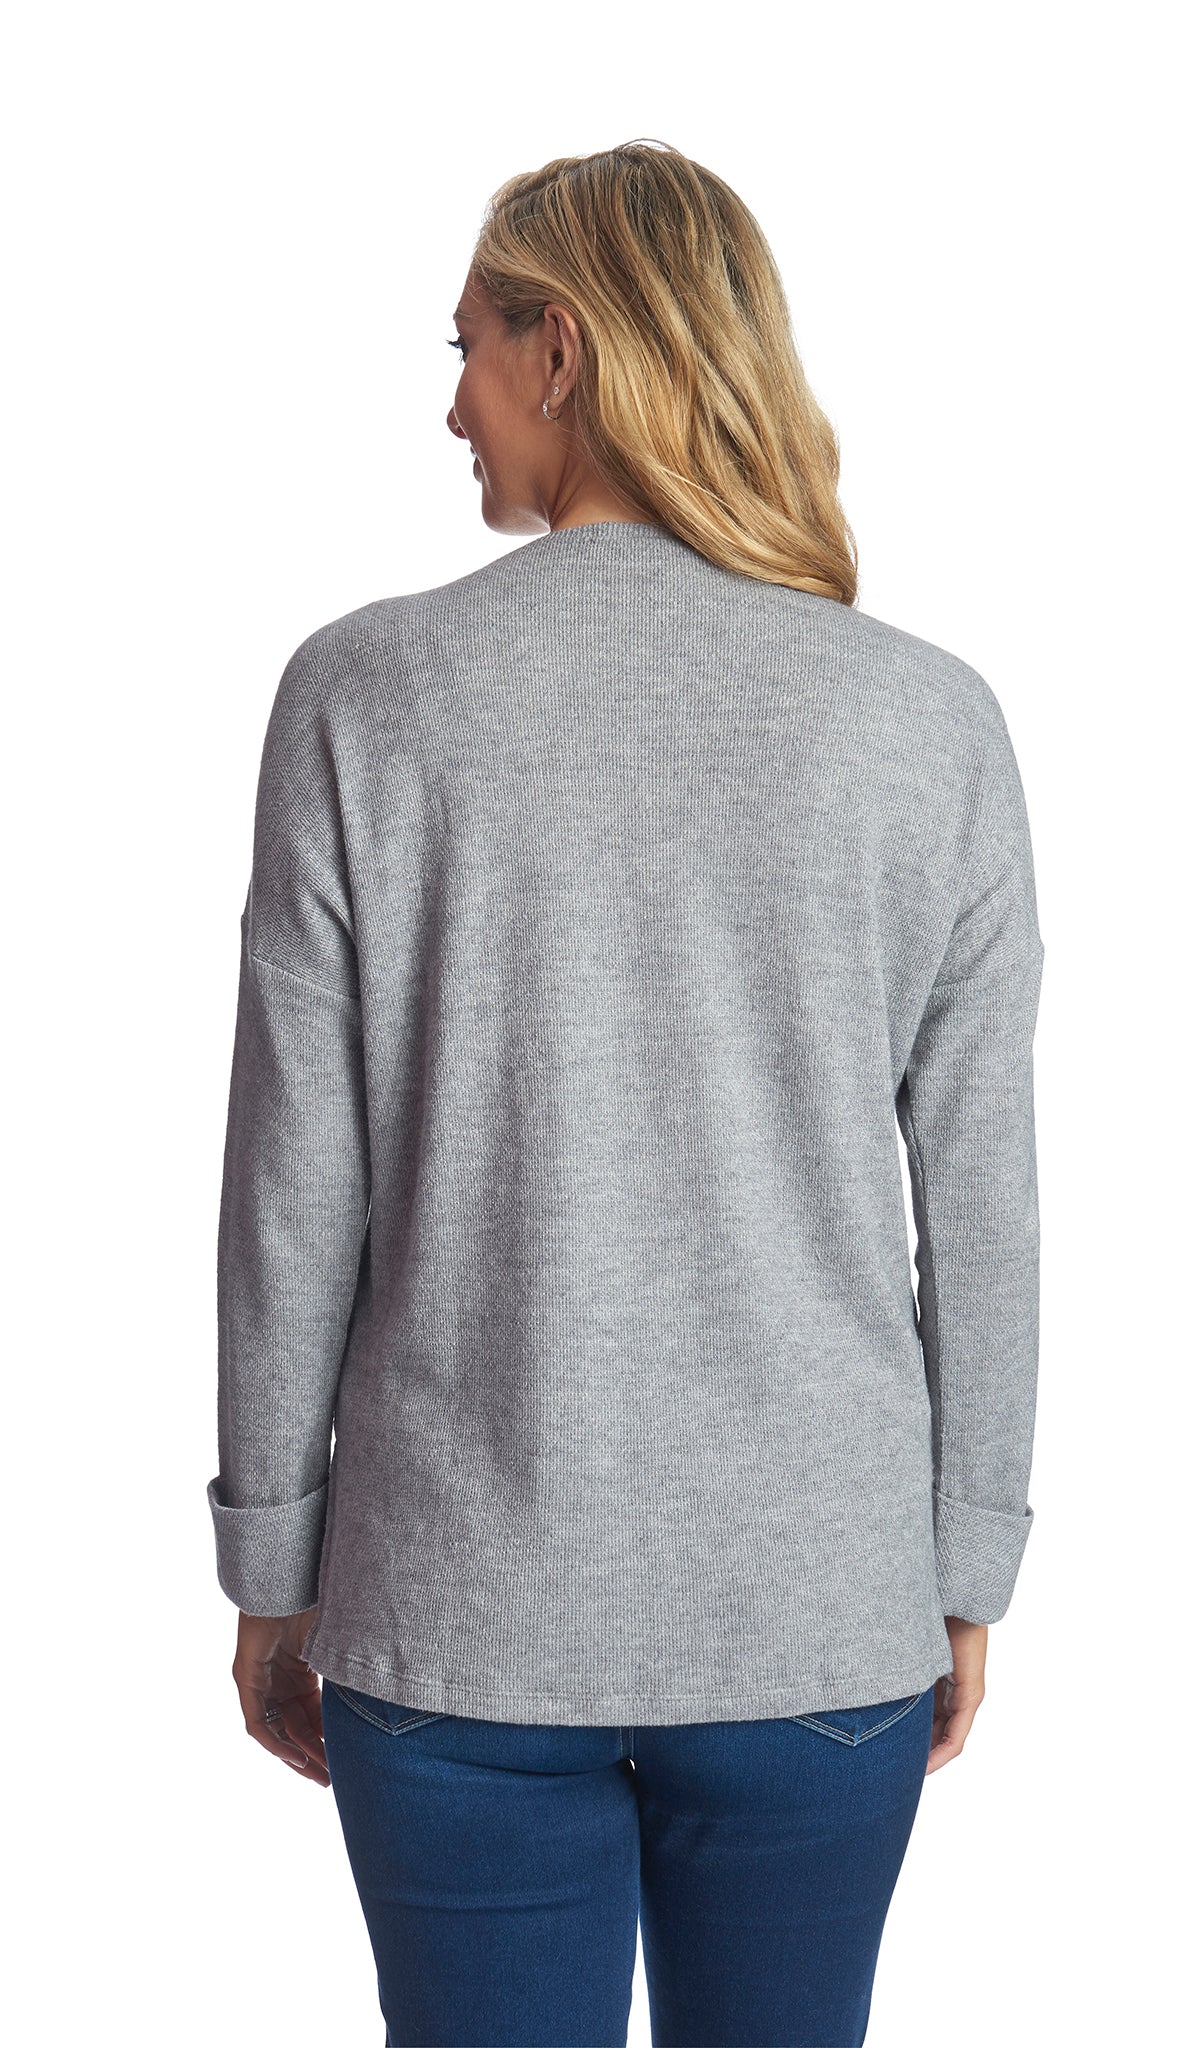 Heather Grey Andria back shot of sweater worn by woman.